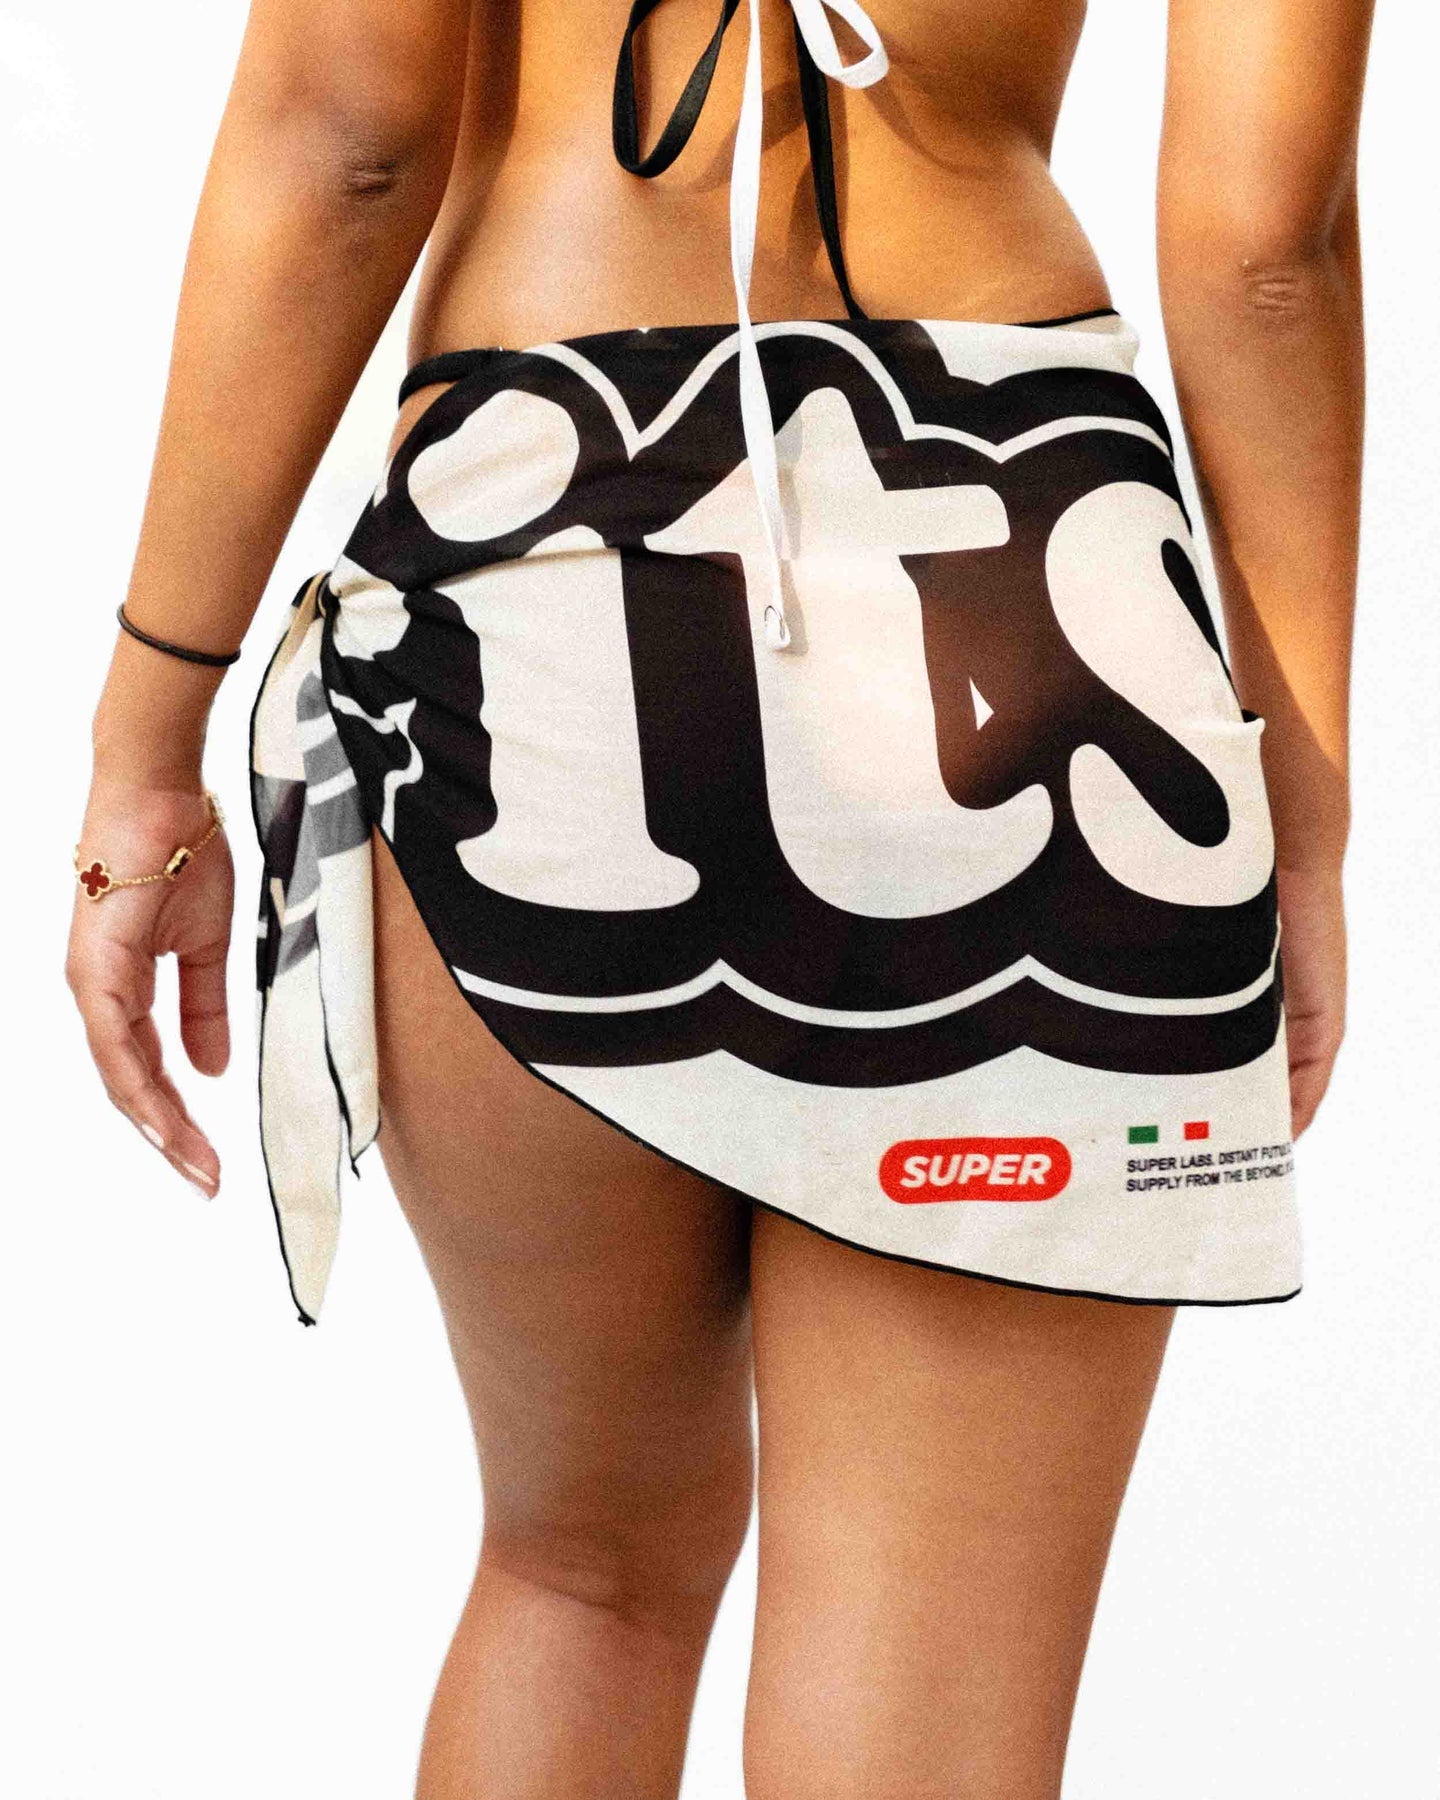 From the rear view model is showcasing a beautiful light weight white and black sarong.